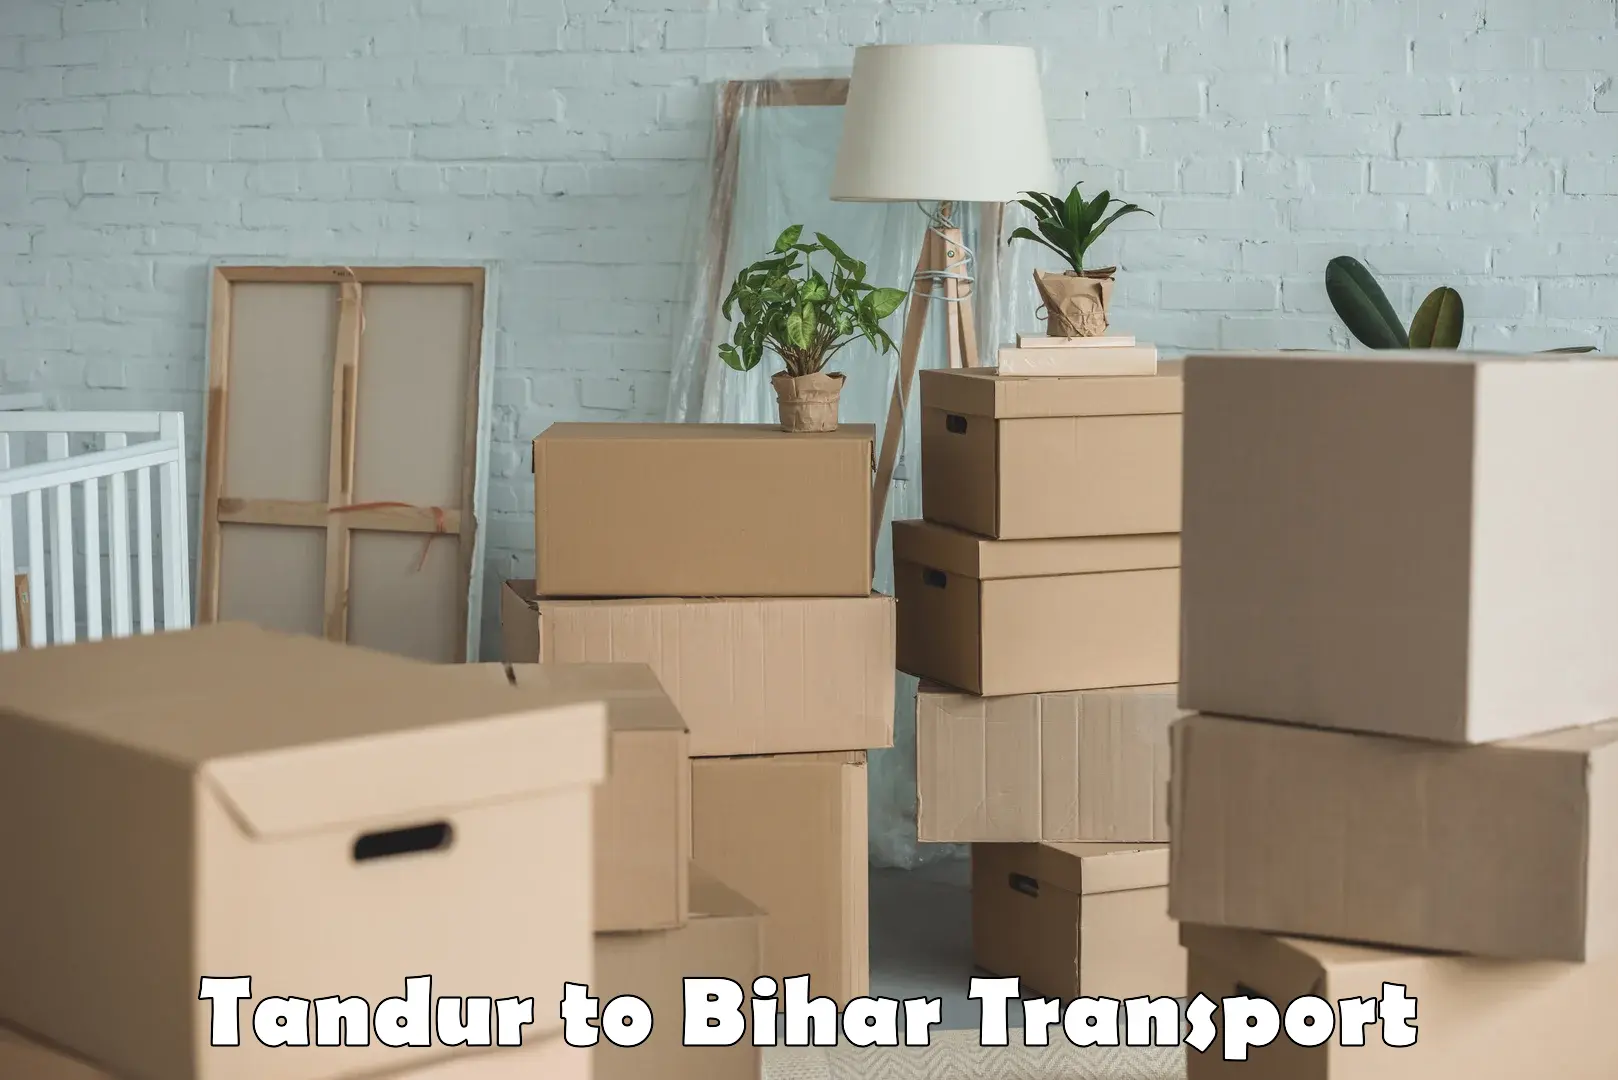 Goods delivery service Tandur to Nuaon